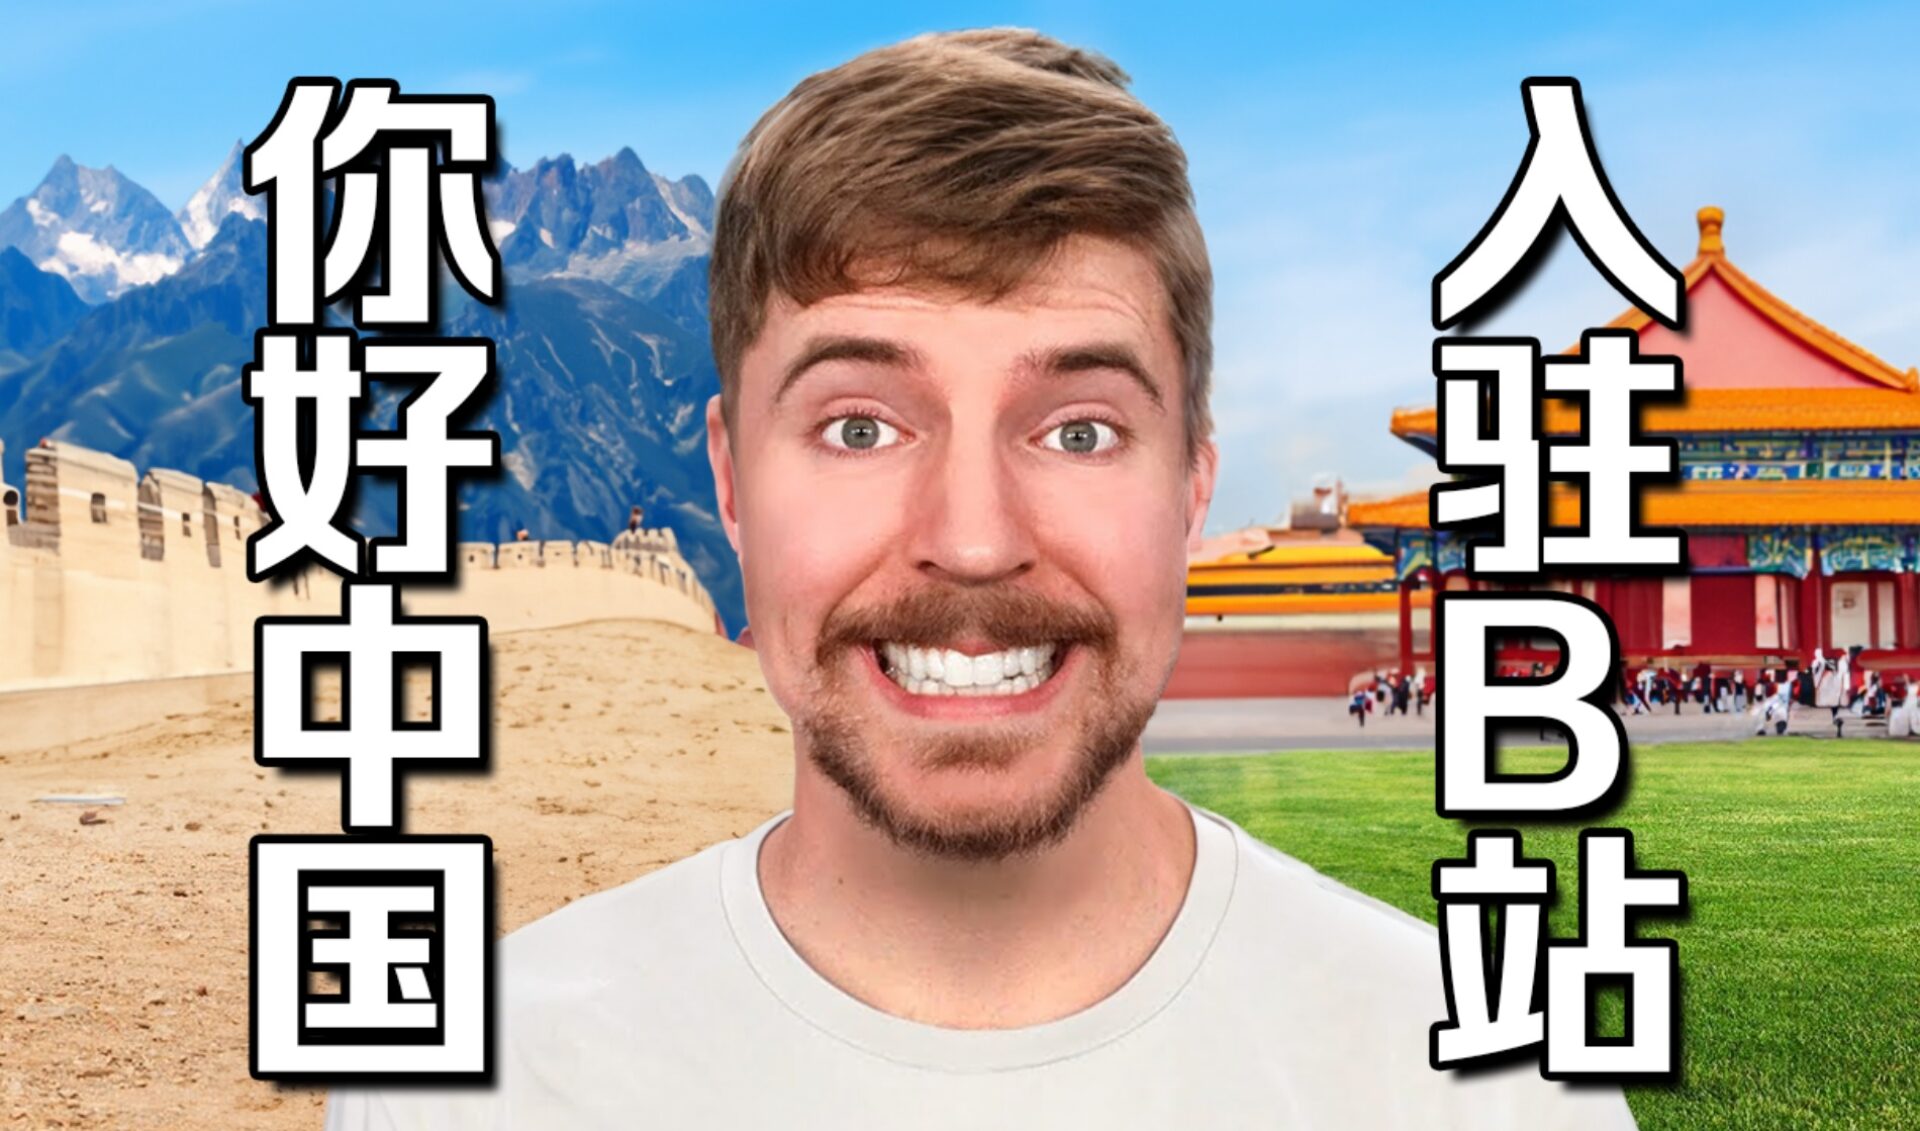 MrBeast’s first video for the Chinese market needed only a few hours to get three million views